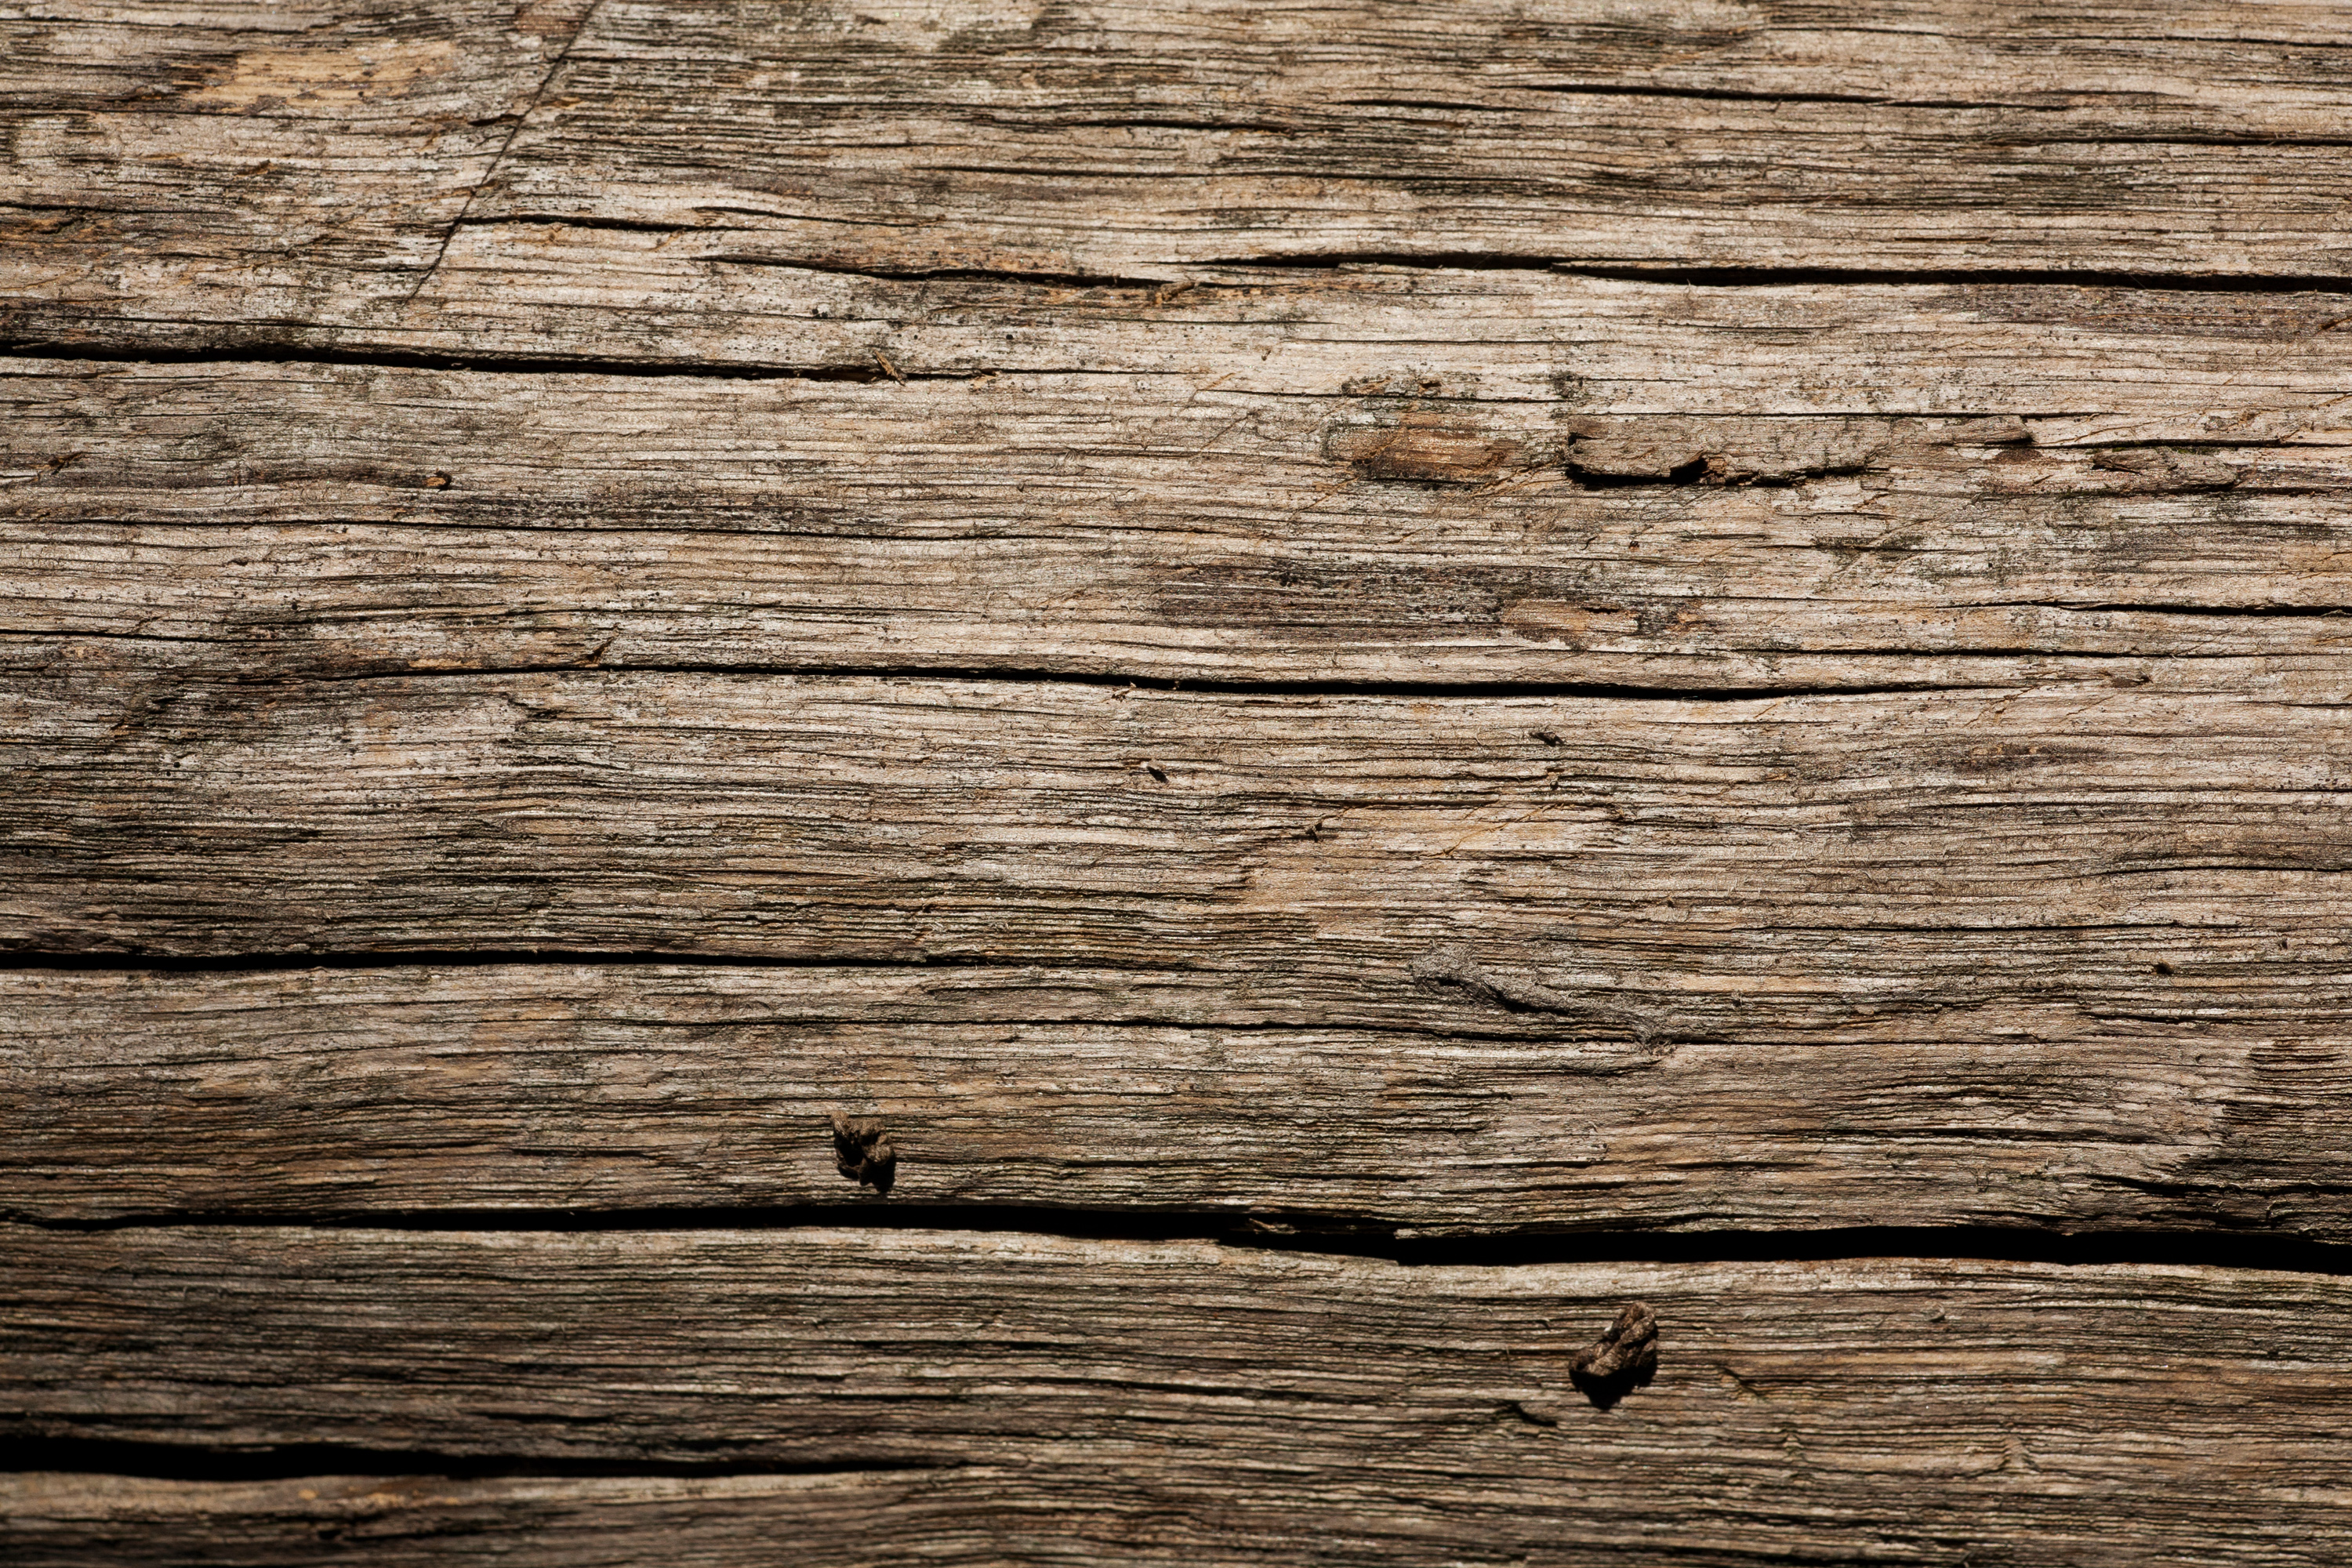 Dry Old Wood Texture Image Backgrounds For Powerpoint Templates Ppt Backgrounds